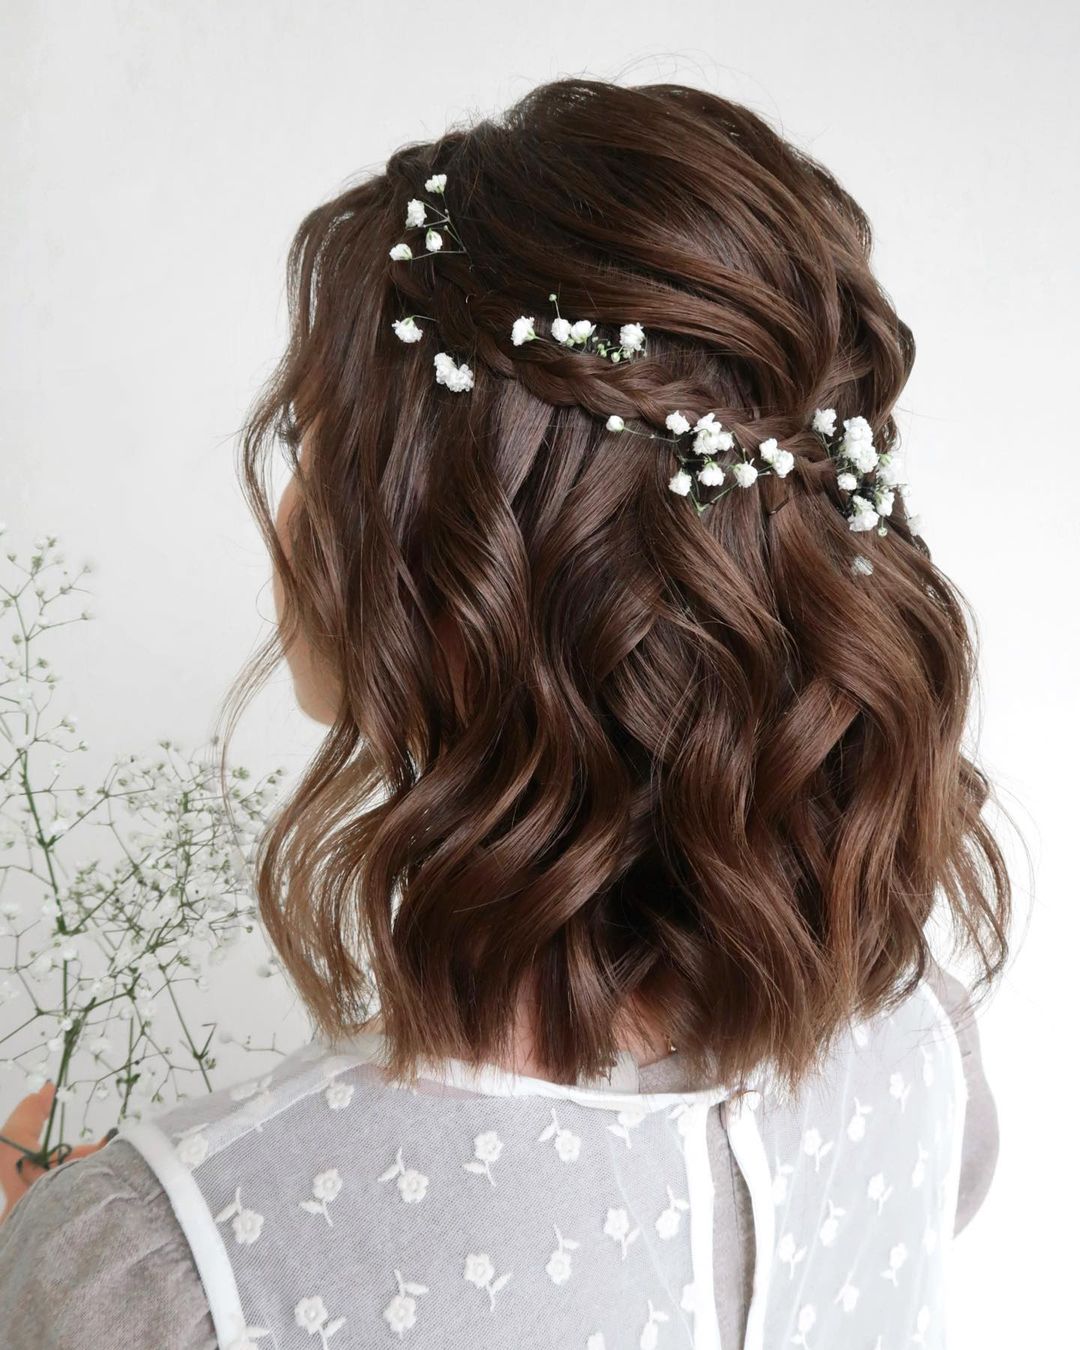 Half Up Bridesmaid Hairstyles Ideas to Check - Love Hairstyles